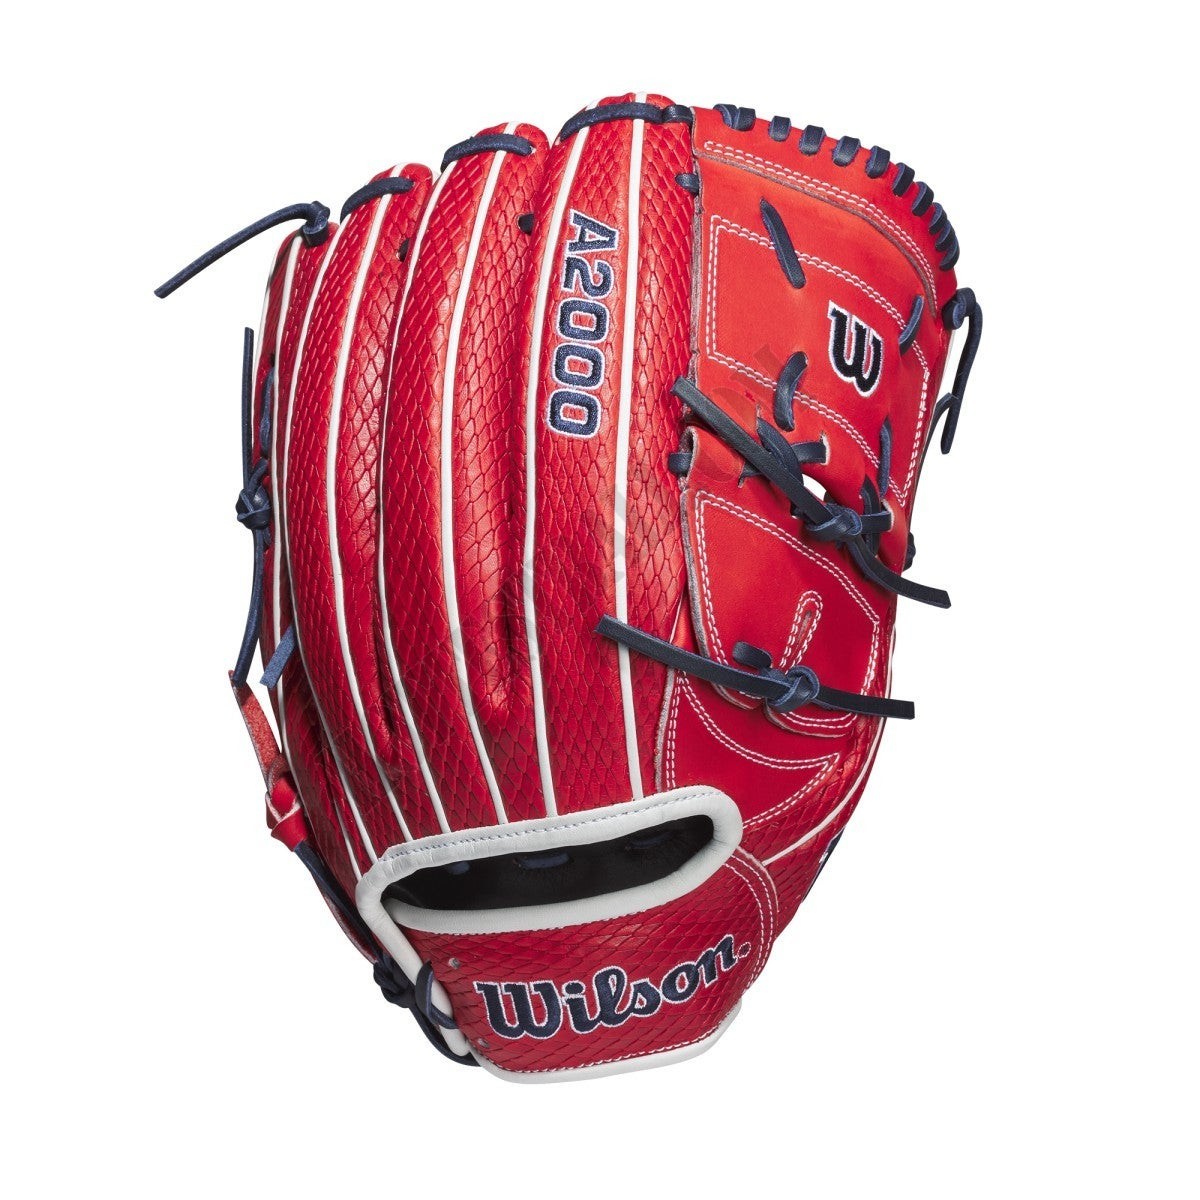 2021 A2000 B125 12.5" Carlos Carrasco Game Model Pitcher's Baseball Glove ● Wilson Promotions - -1